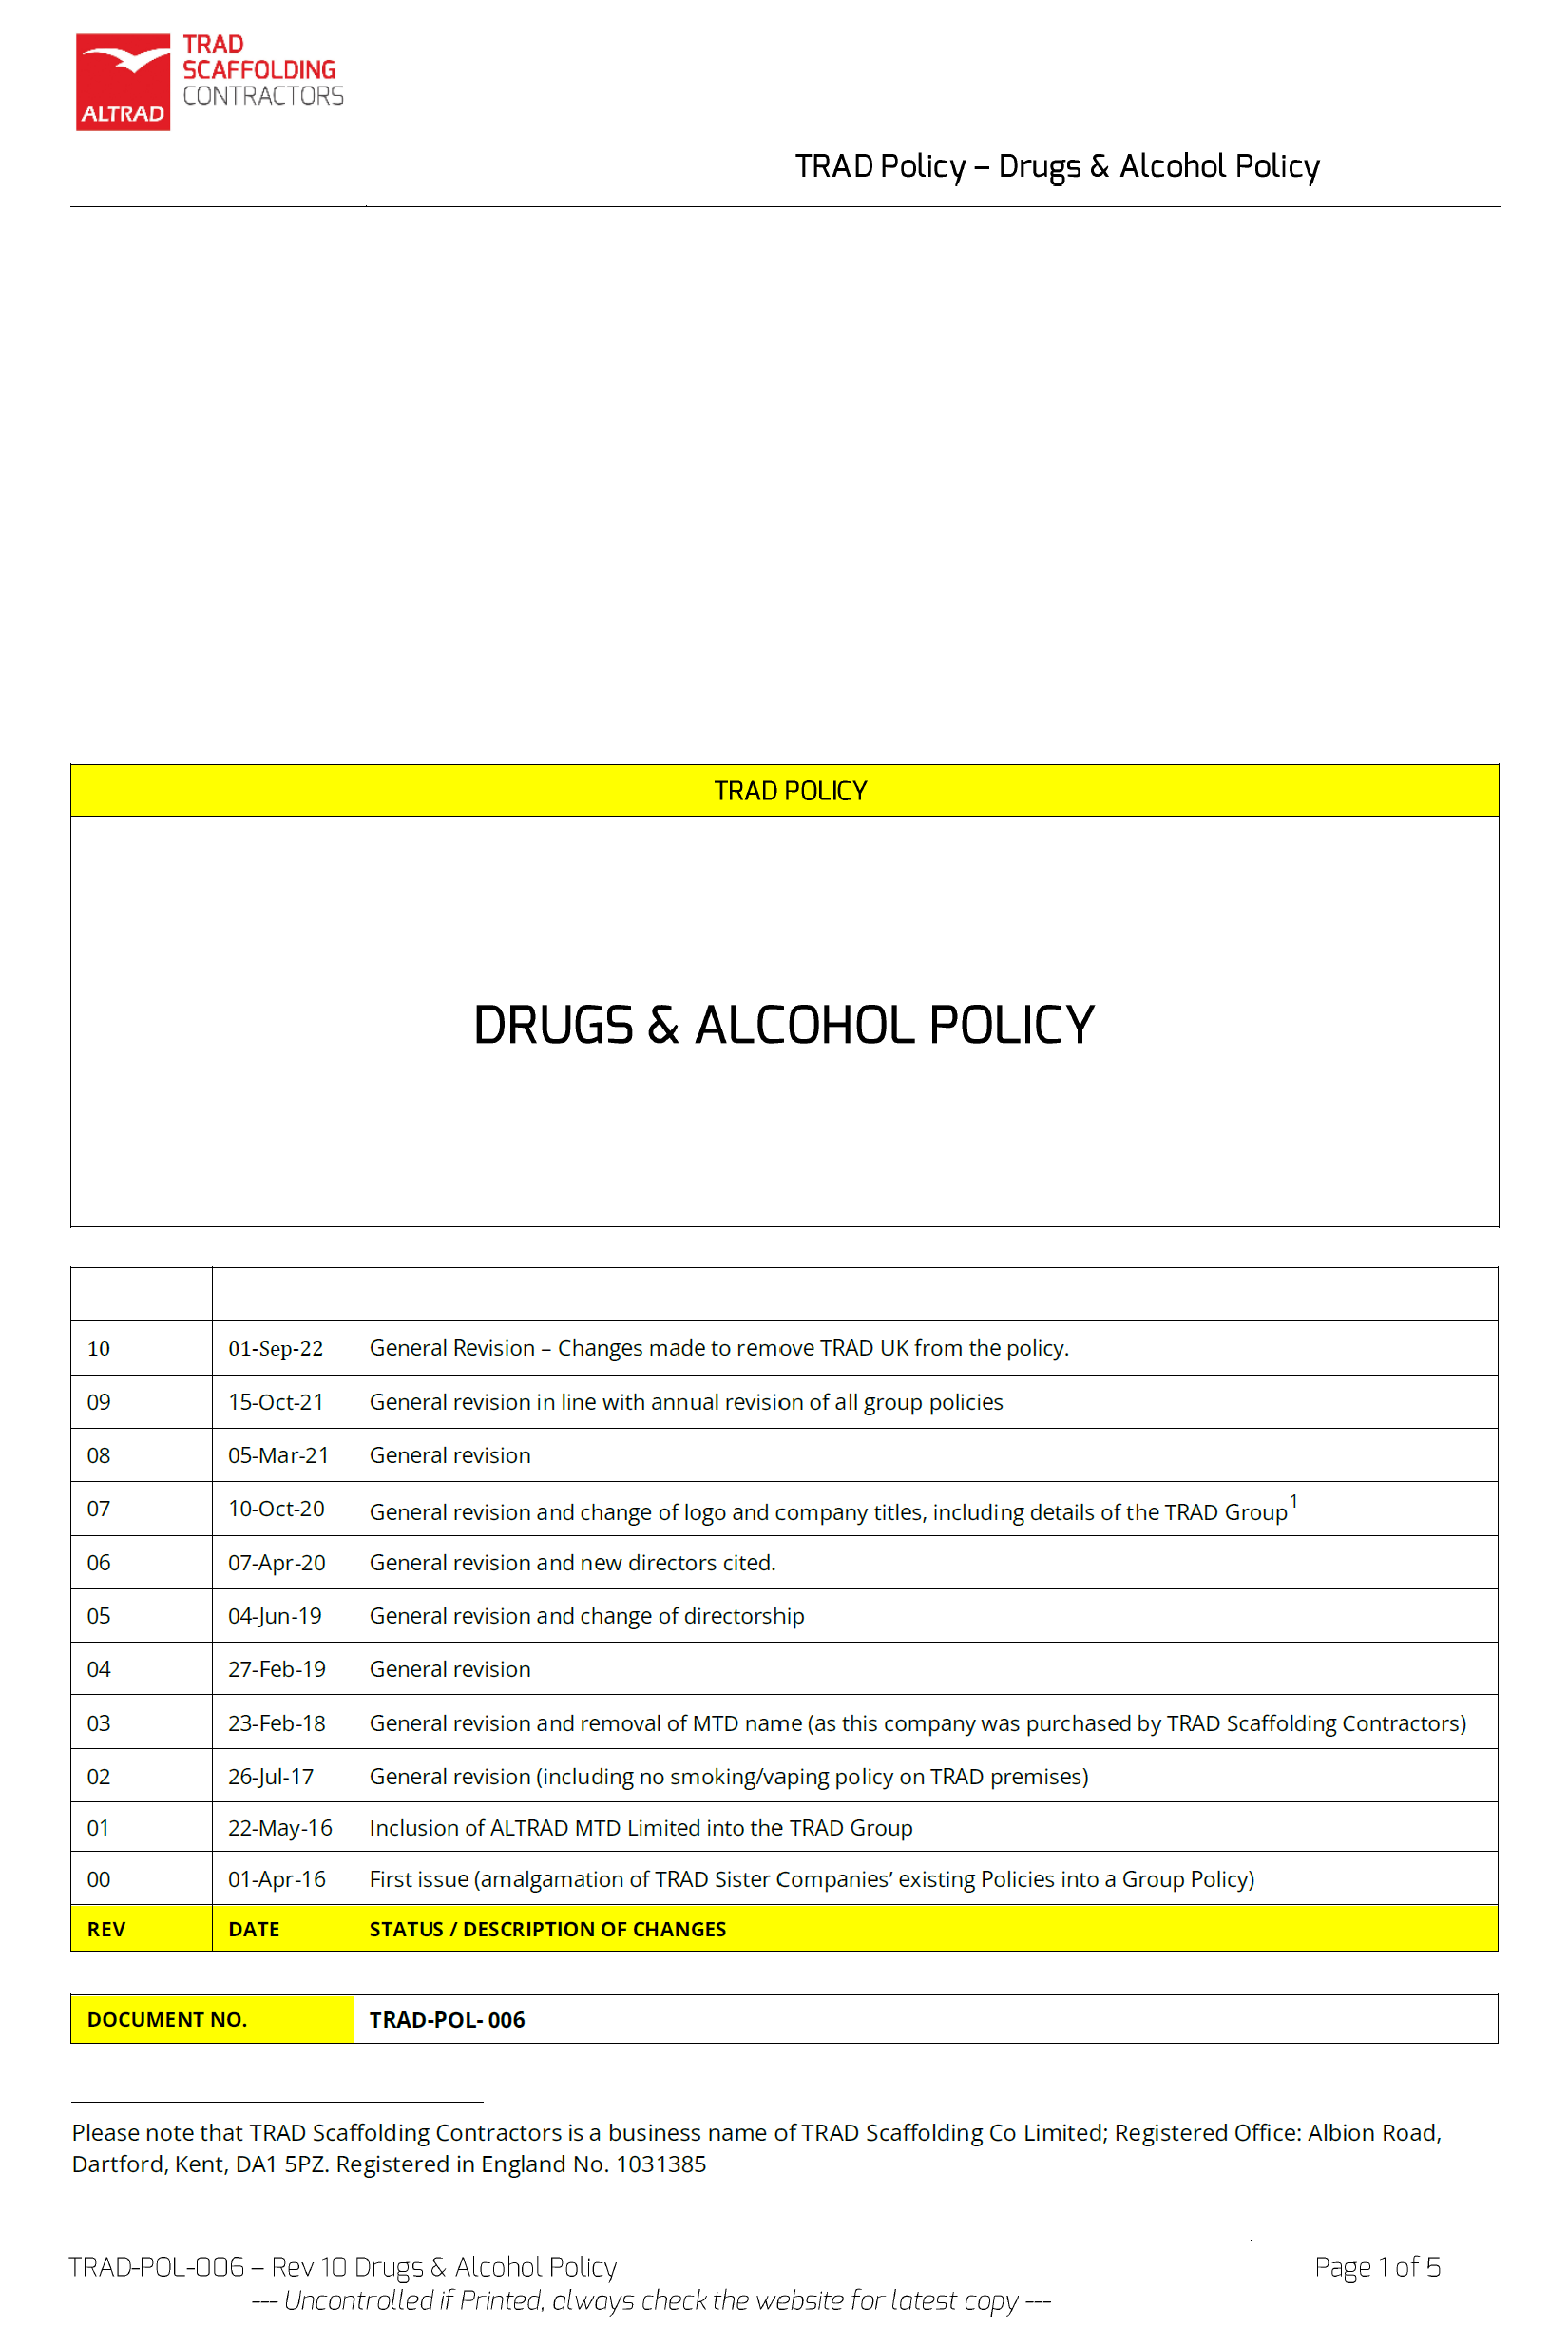 GRUGS AND ALCOHOL POLICY